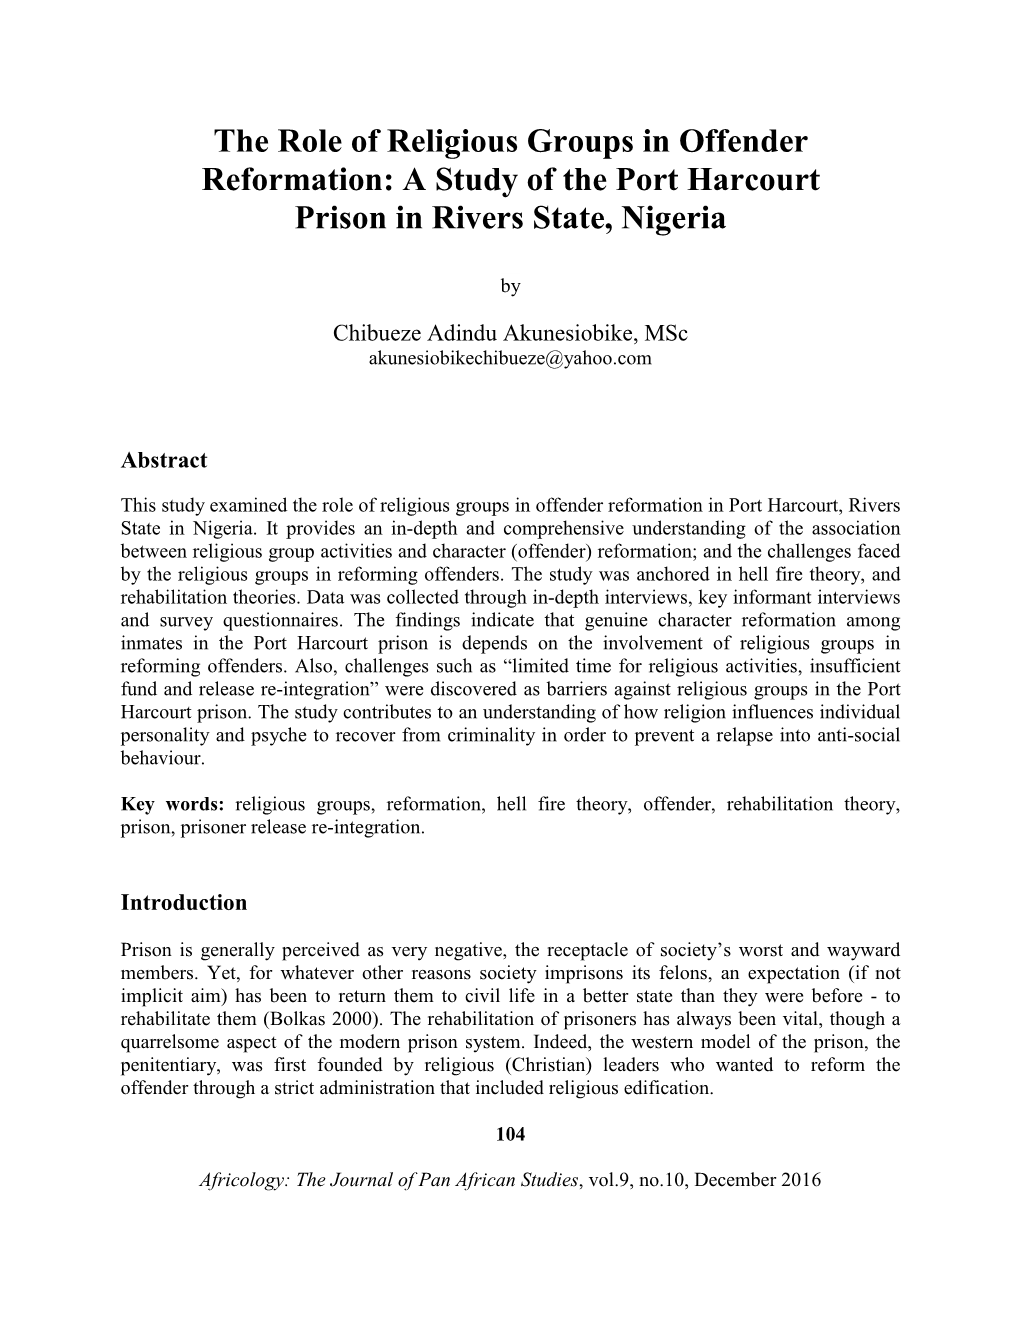 A Study of the Port Harcourt Prison in Rivers State, Nigeria